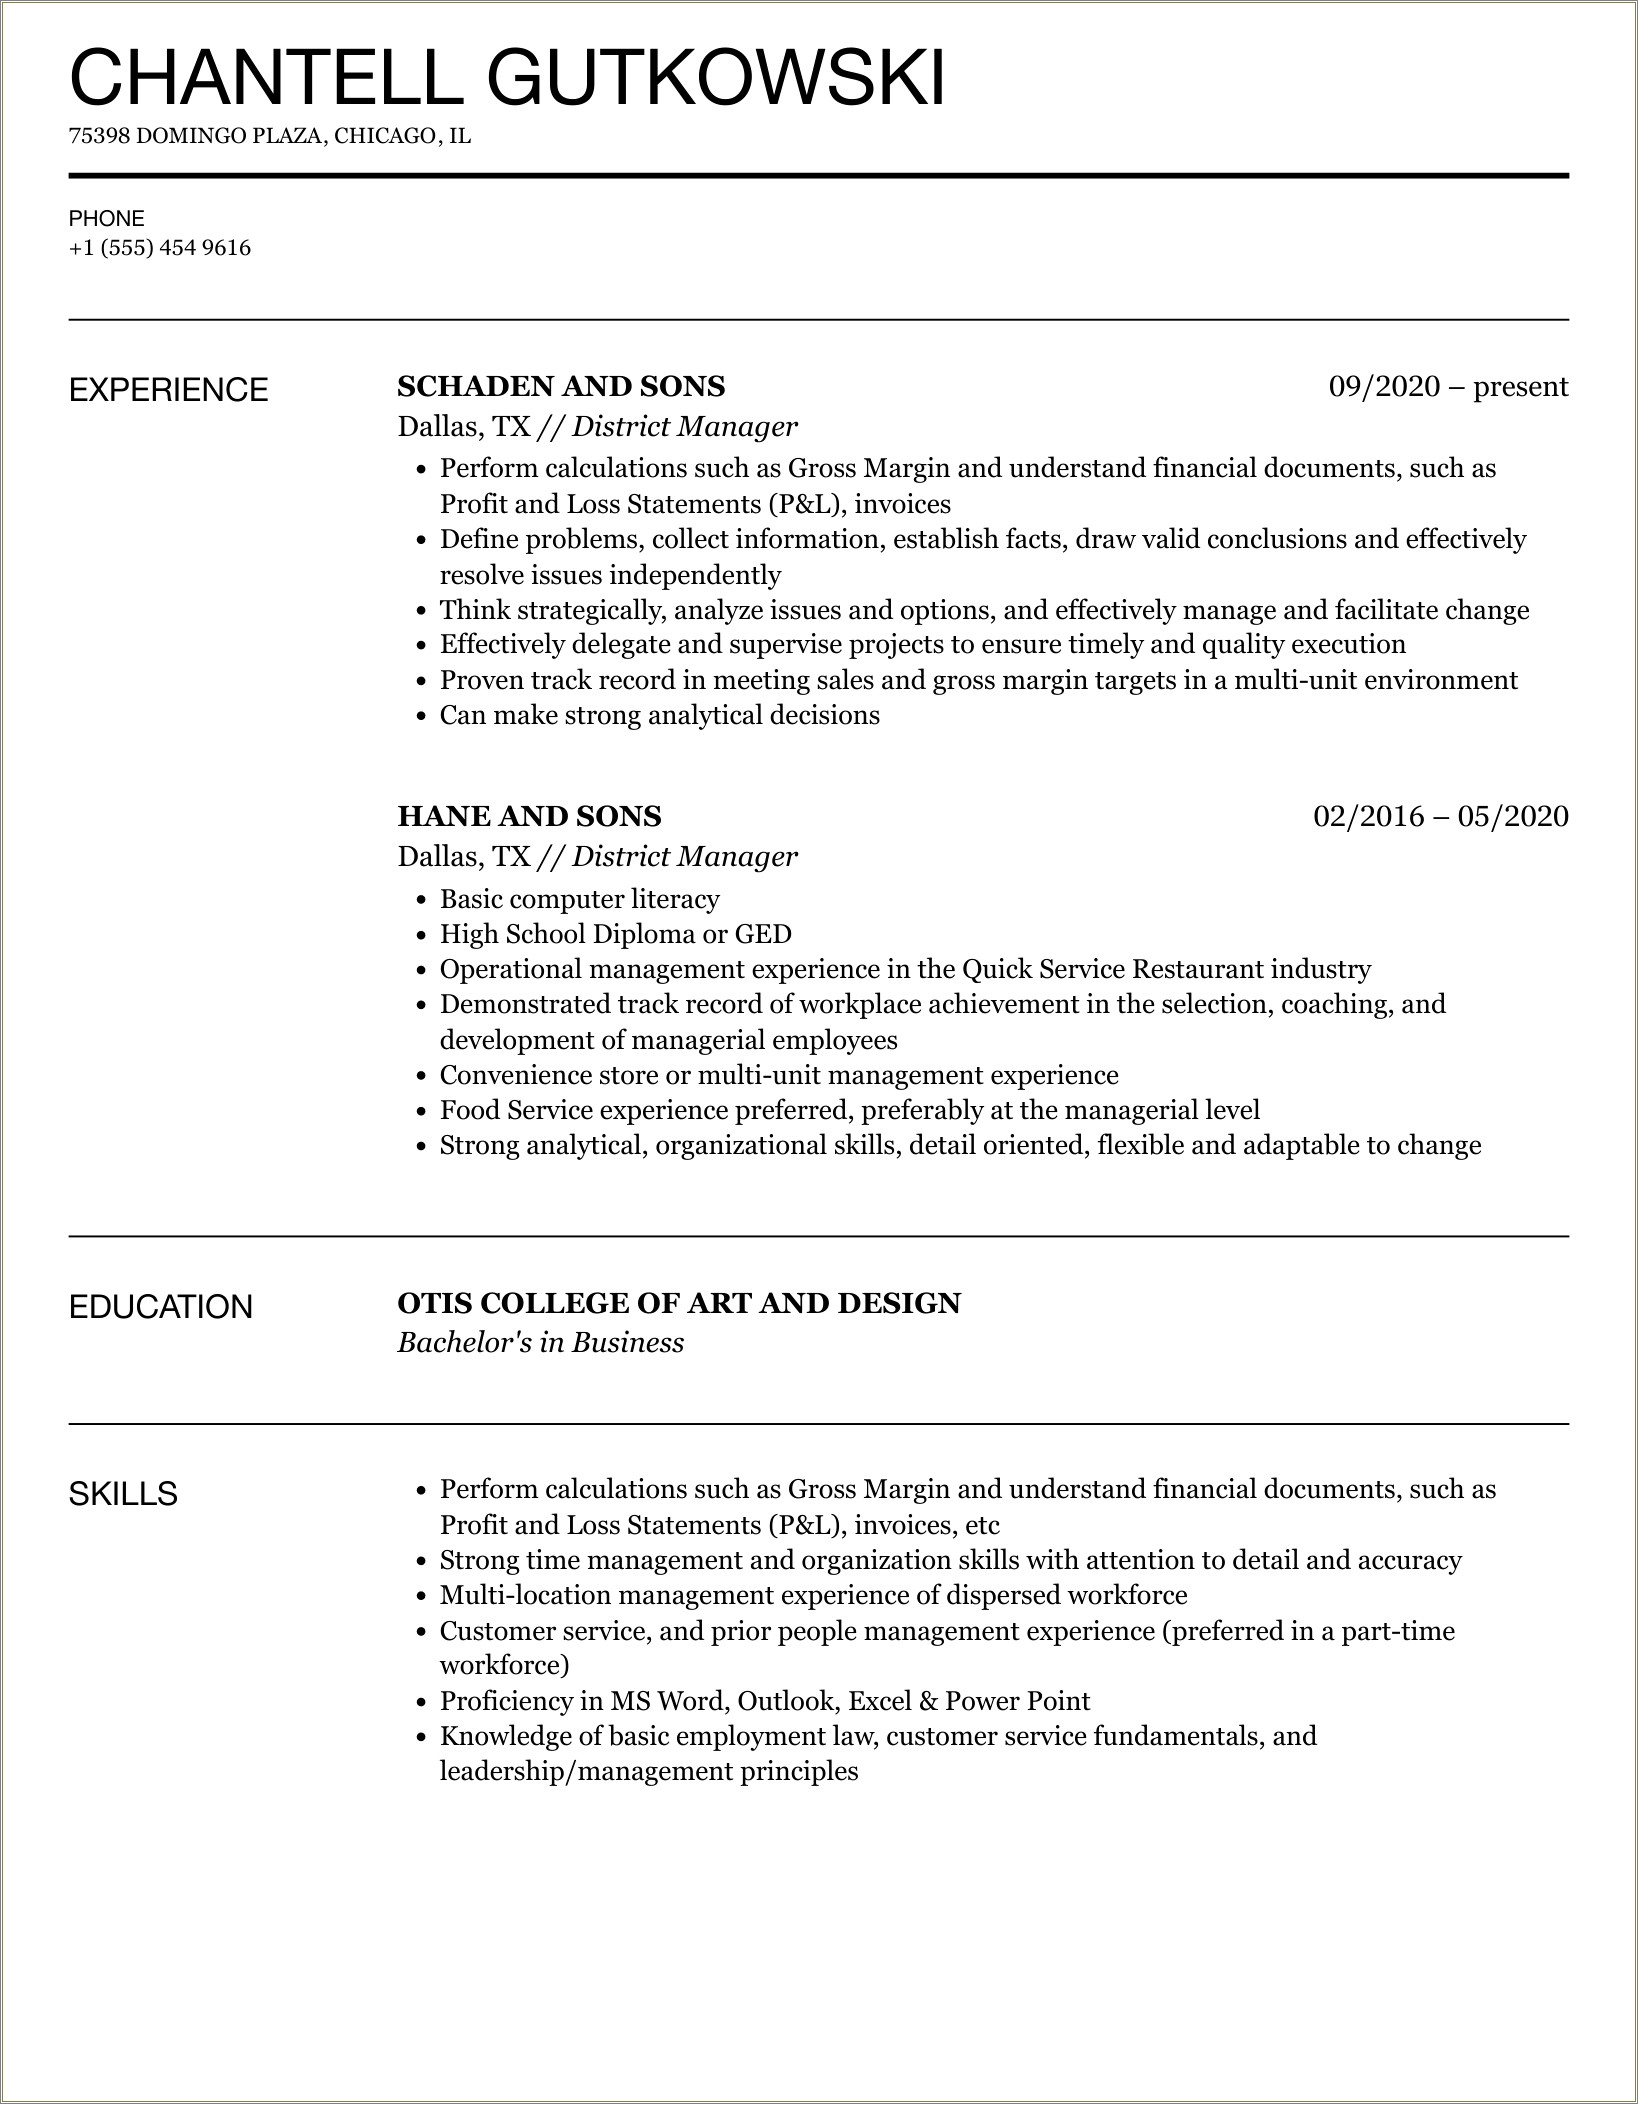 Resume Objective Examples For Home Depot